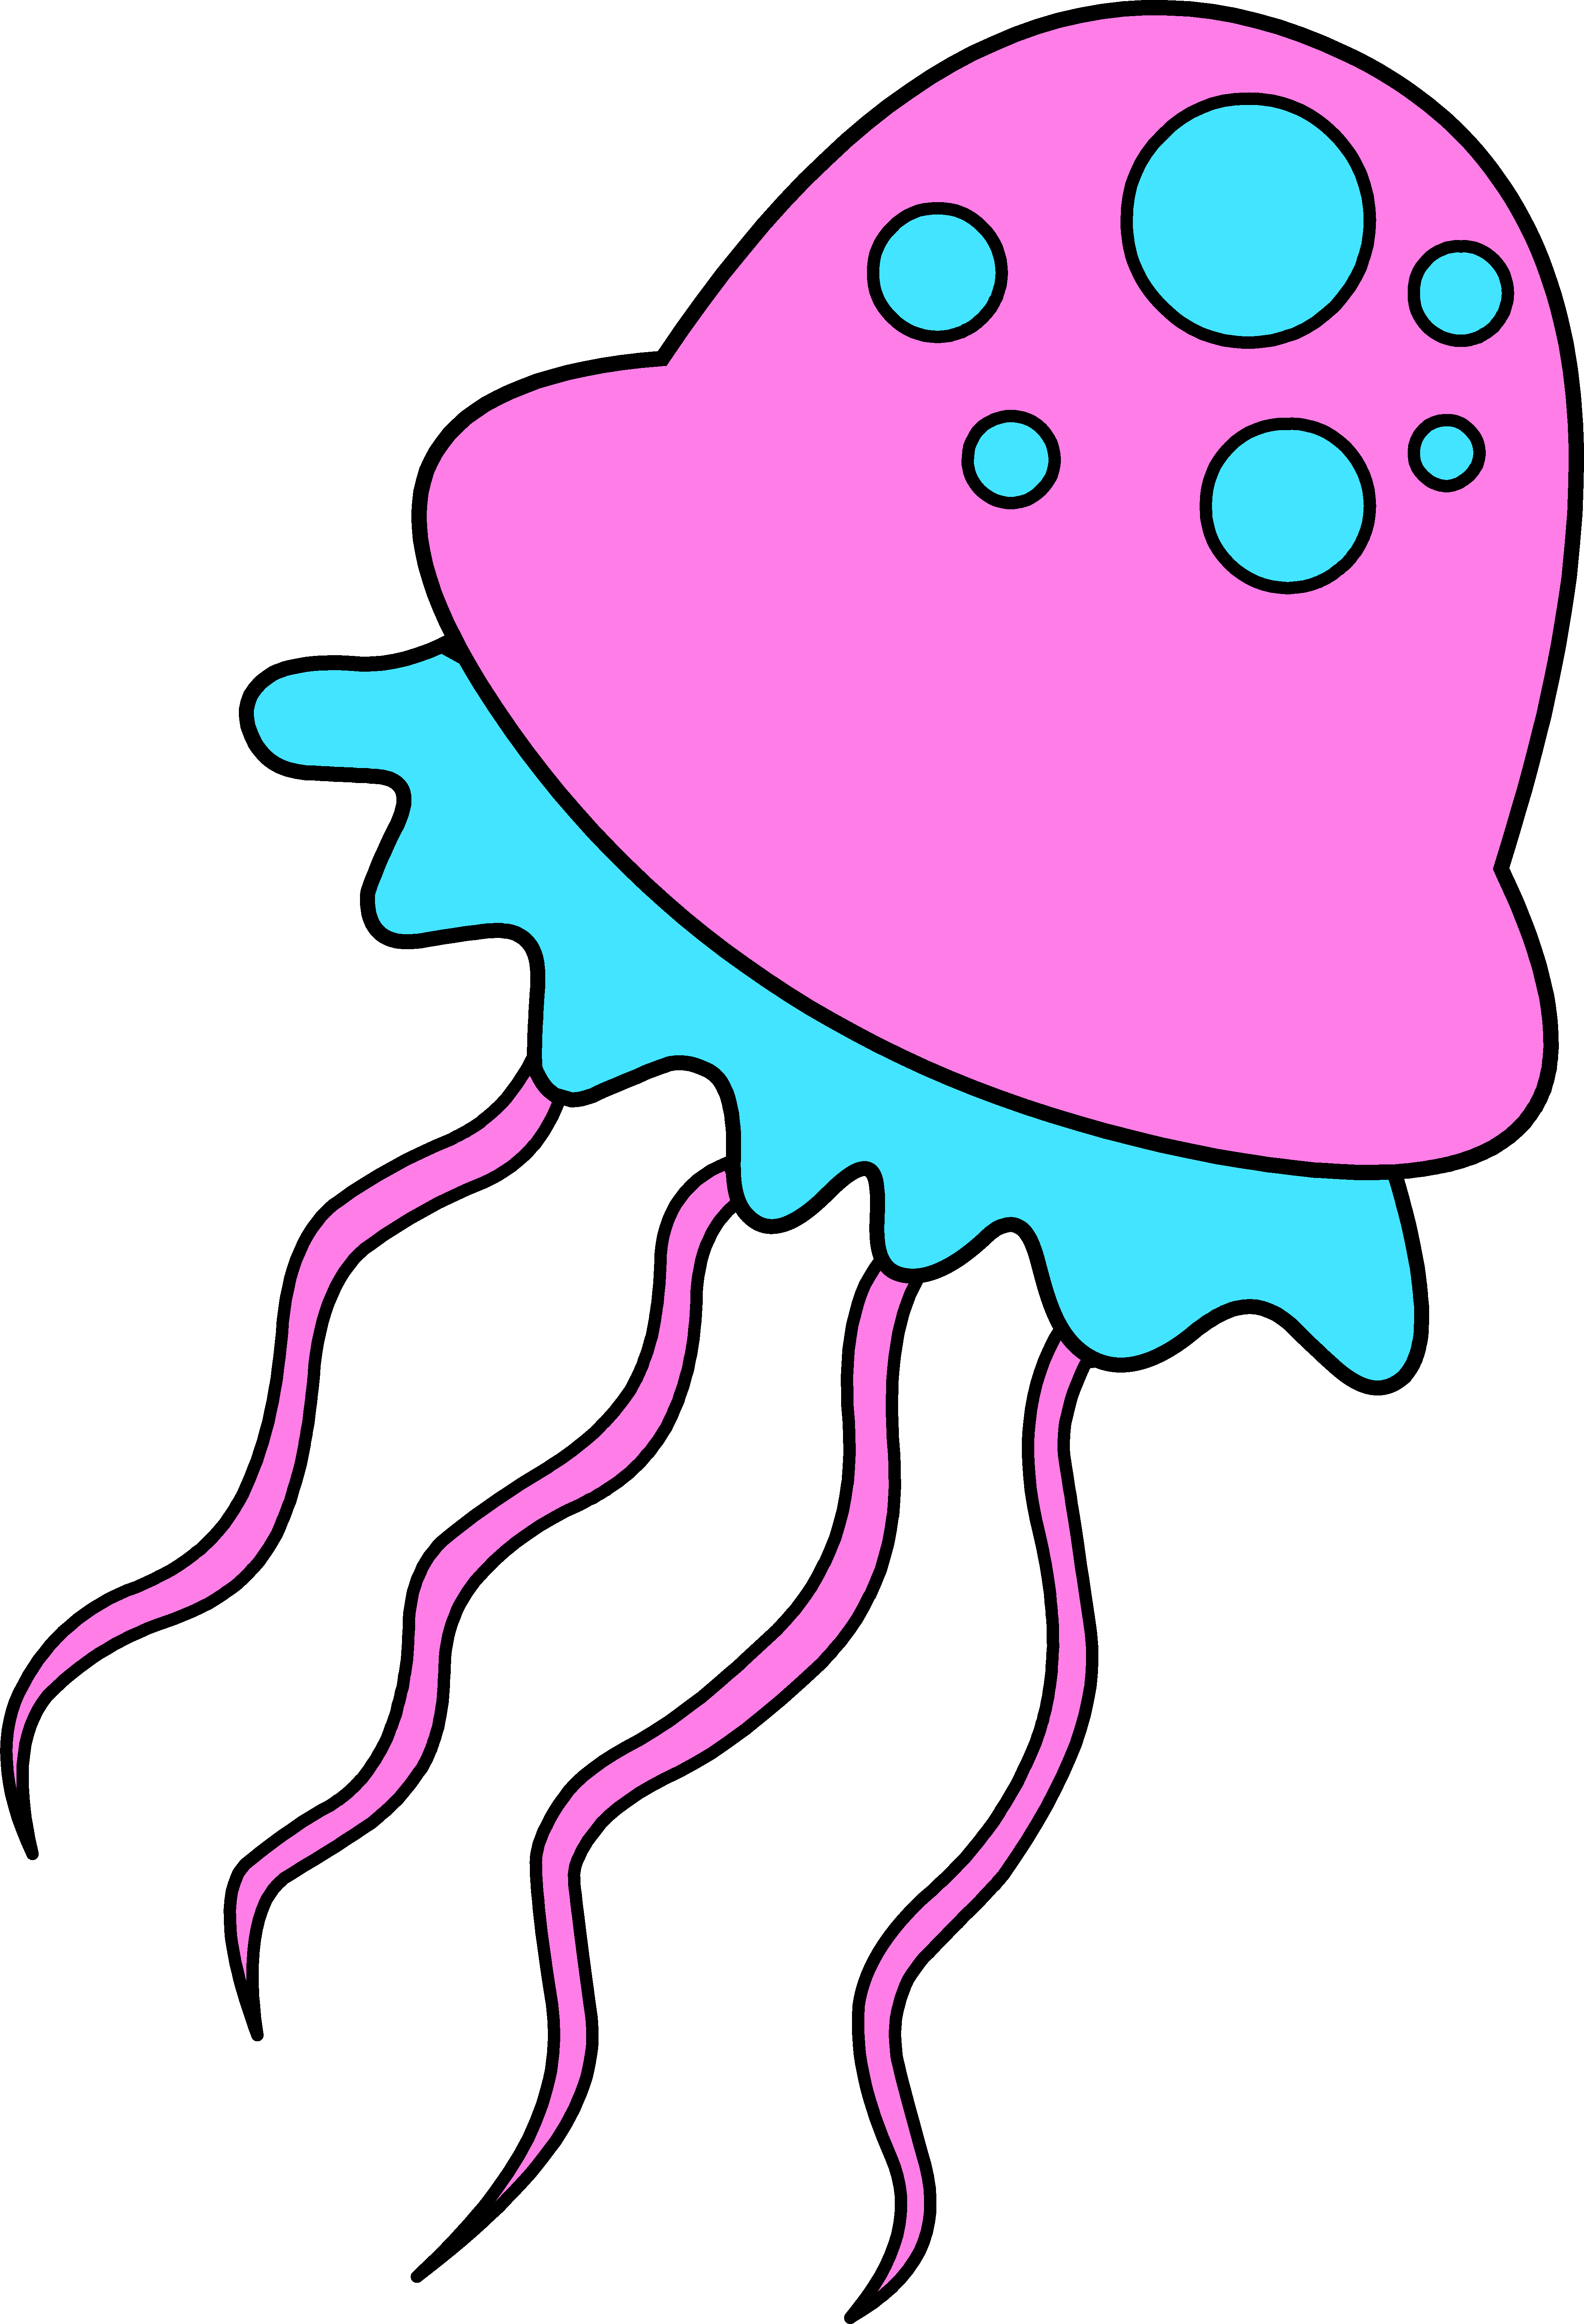 Pink and blue jellyfish. Poverty clipart hopeless